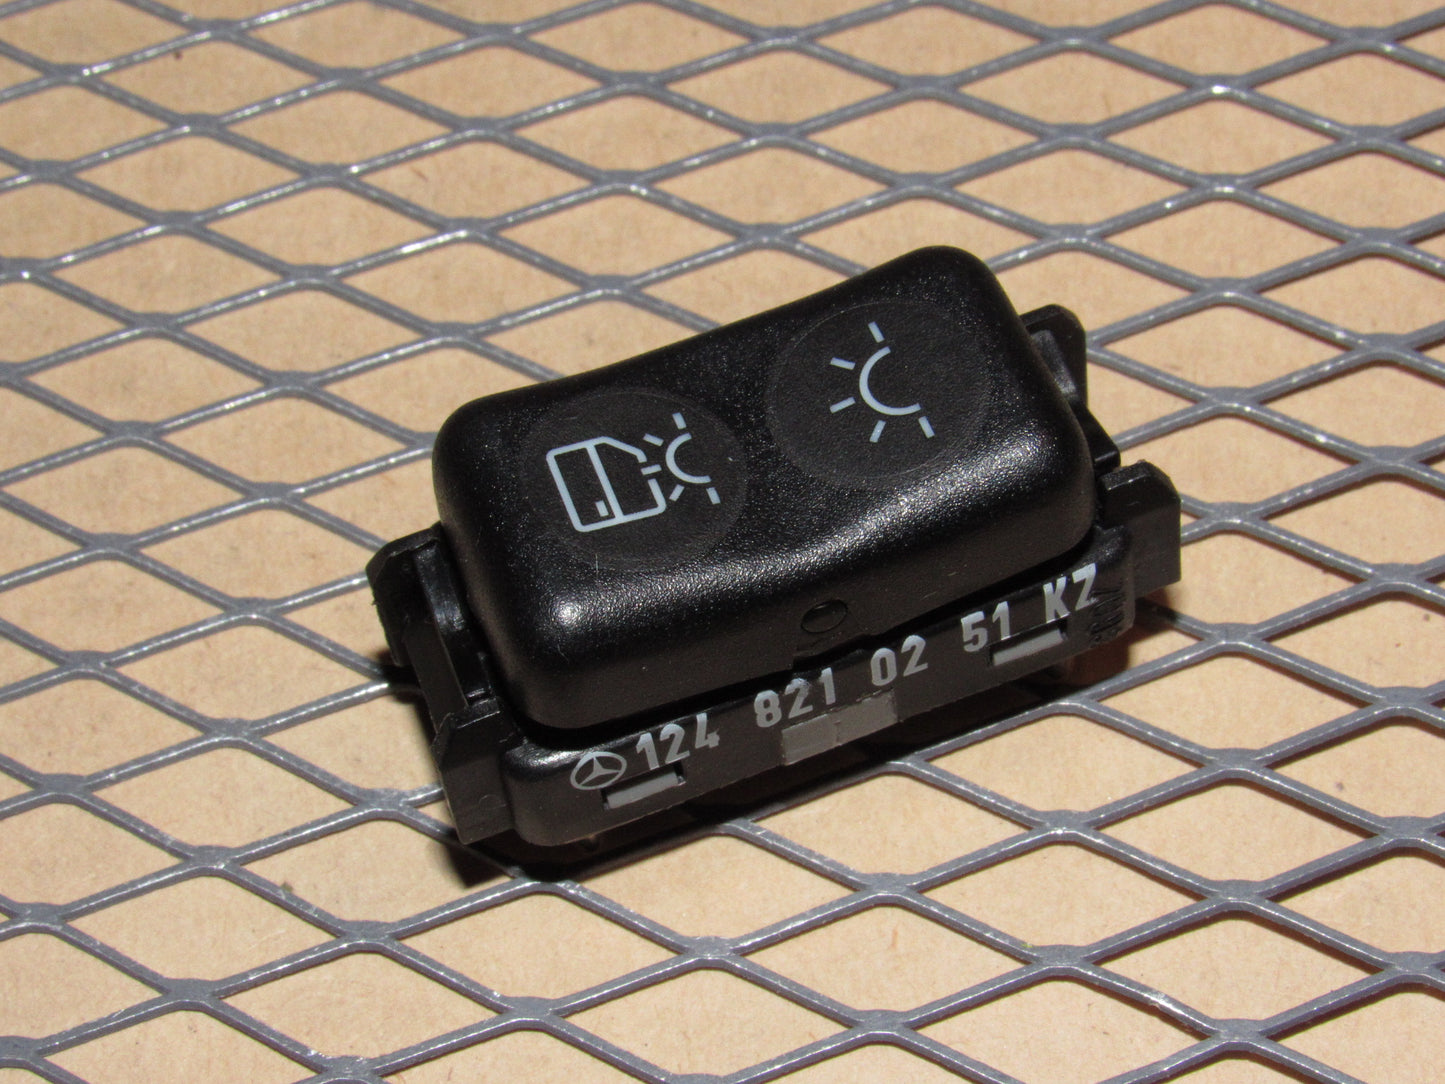 88 89 90 91 92 93 Mercedes Benz 300TE OEM Dome Map Light Switch